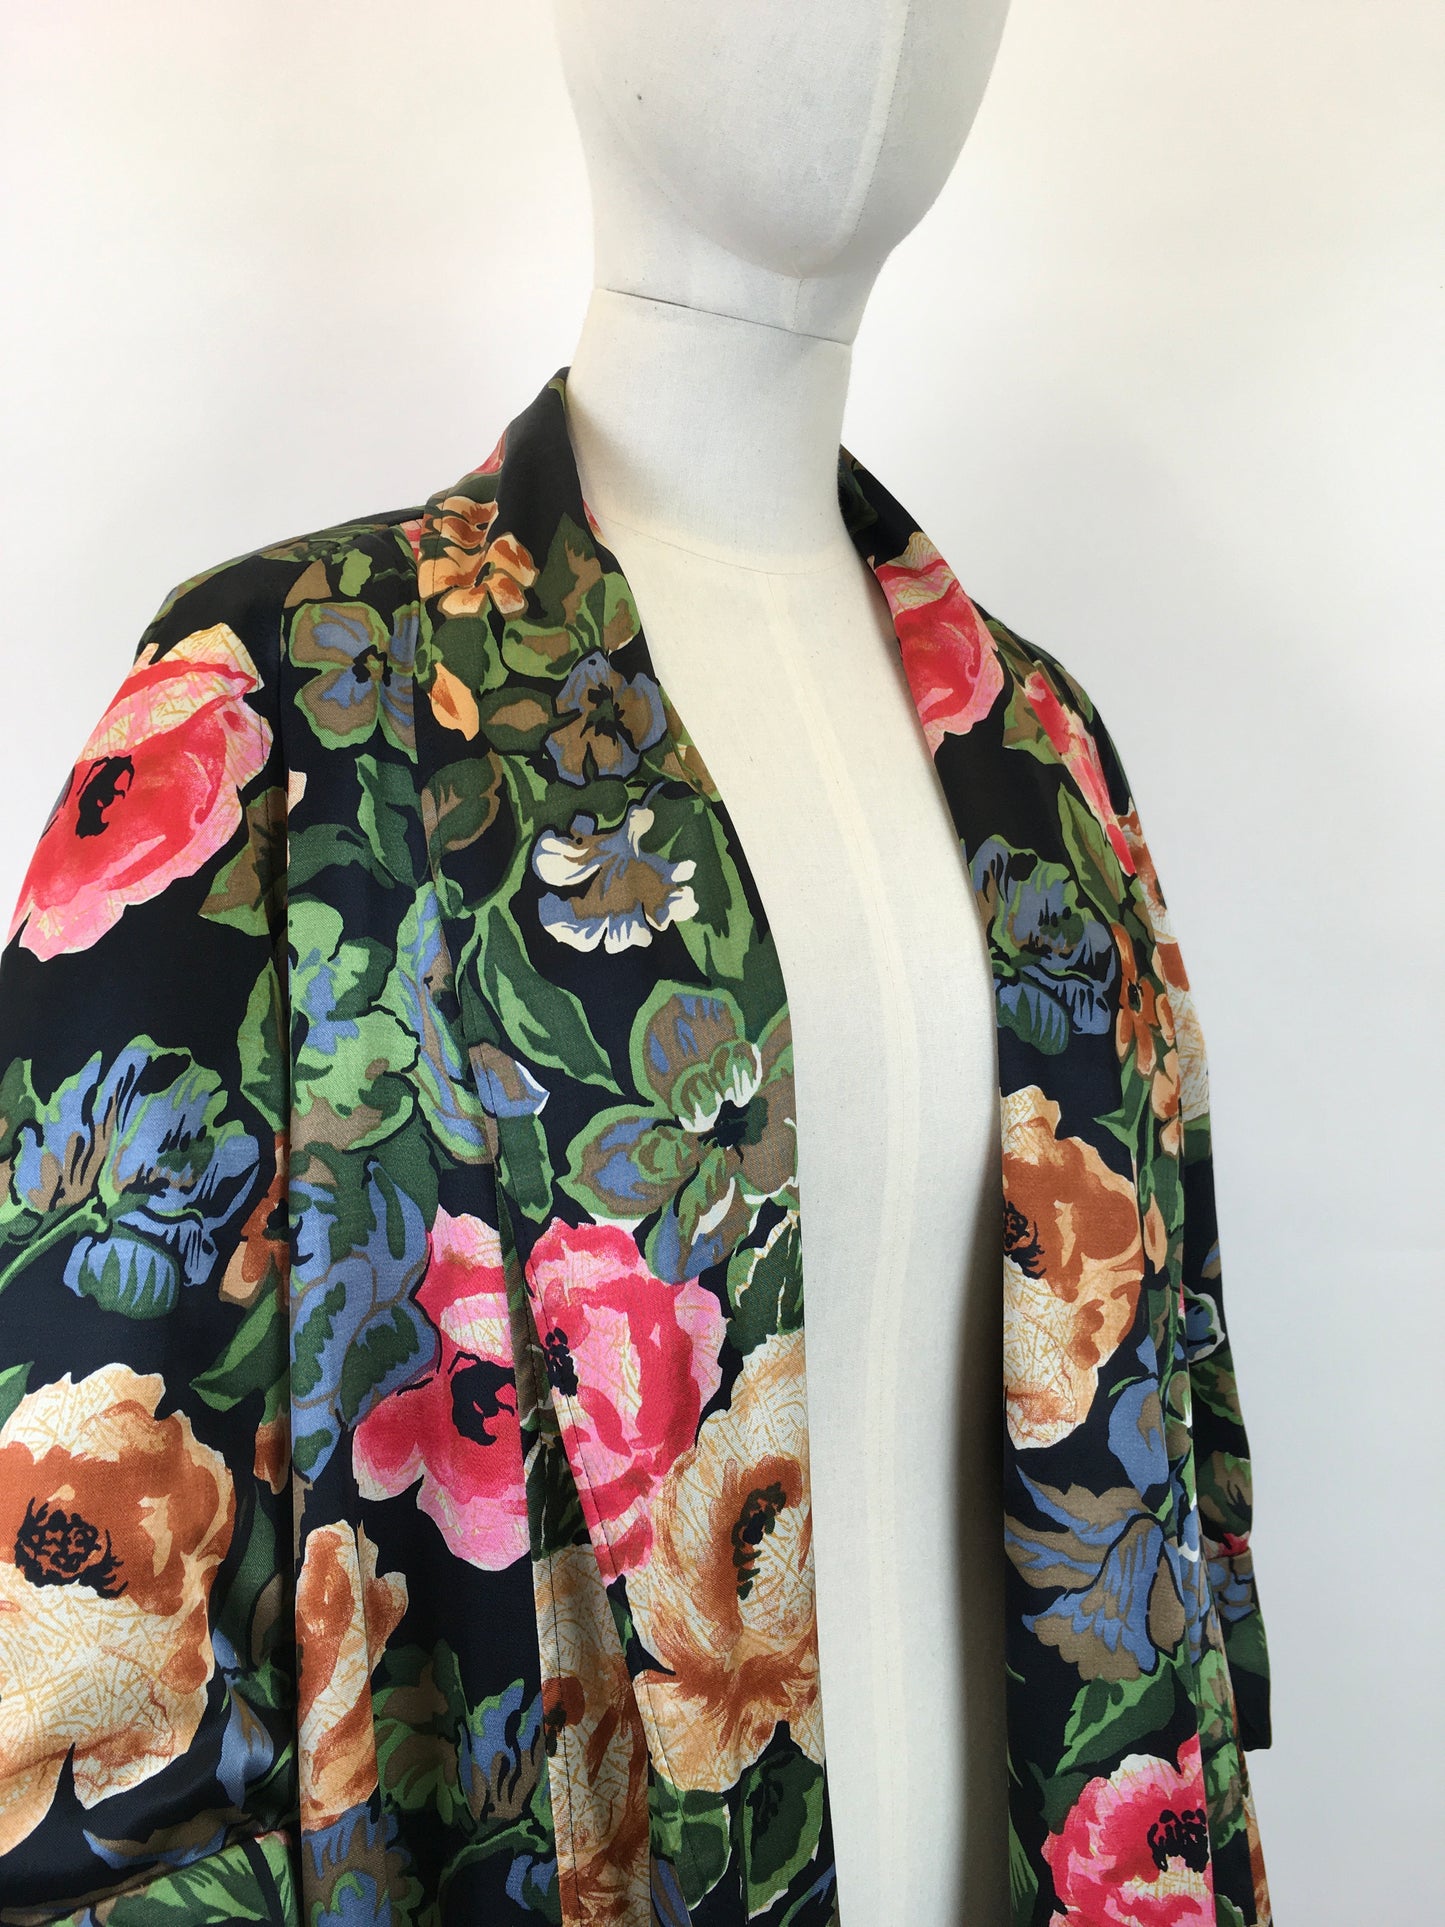 Original 1950’s SENSATIONAL ‘ Peter French’ Swagger Jacket - In Floral Bloom